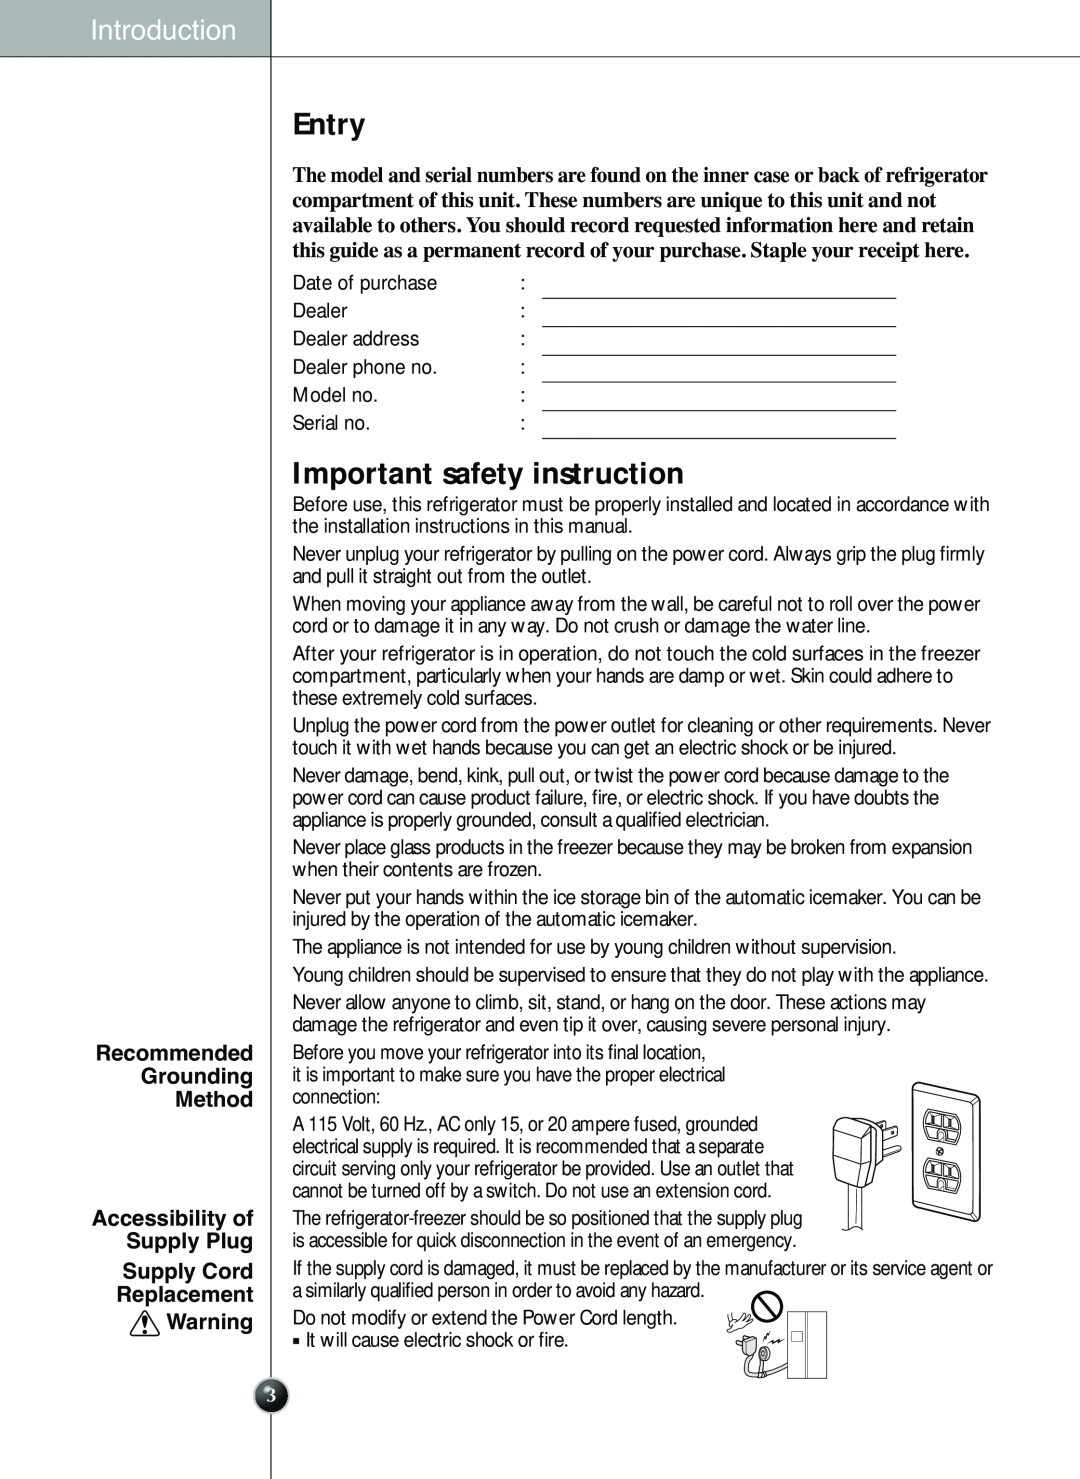 LG Electronics LSC 26905TT manual Entry, Important safety instruction, Introduction, Replacement 